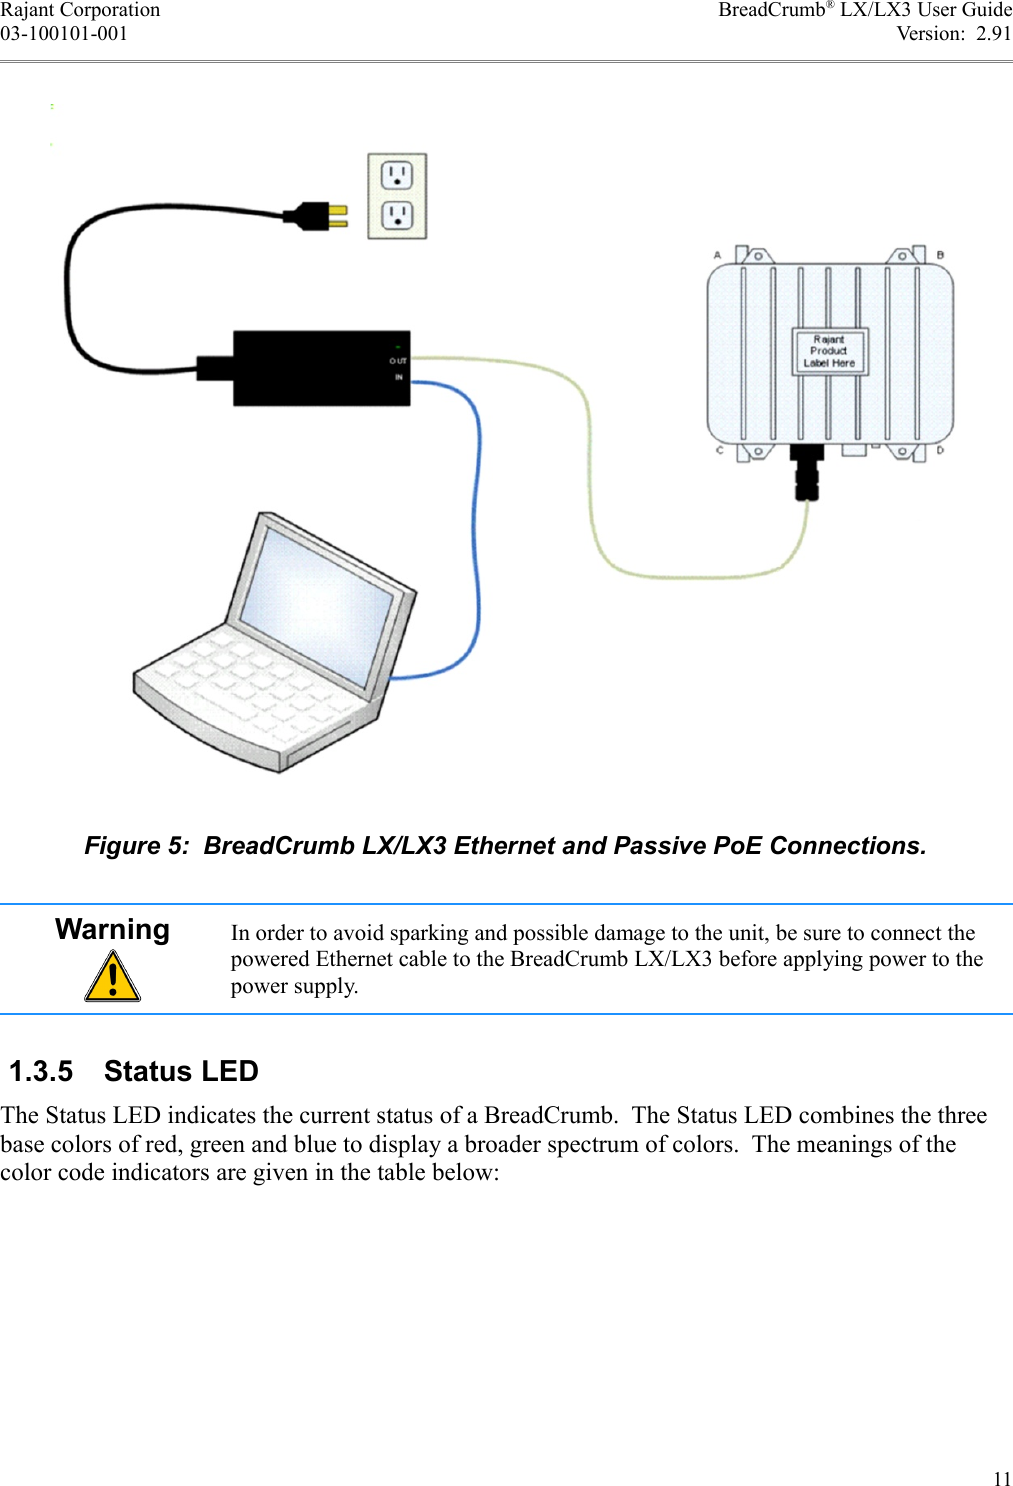 Rajant Corporation BreadCrumb® LX/LX3 User Guide03-100101-001 Version:  2.91Warning In order to avoid sparking and possible damage to the unit, be sure to connect the powered Ethernet cable to the BreadCrumb LX/LX3 before applying power to the power supply. 1.3.5  Status LEDThe Status LED indicates the current status of a BreadCrumb.  The Status LED combines the three base colors of red, green and blue to display a broader spectrum of colors.  The meanings of the color code indicators are given in the table below:11Figure 5:  BreadCrumb LX/LX3 Ethernet and Passive PoE Connections.